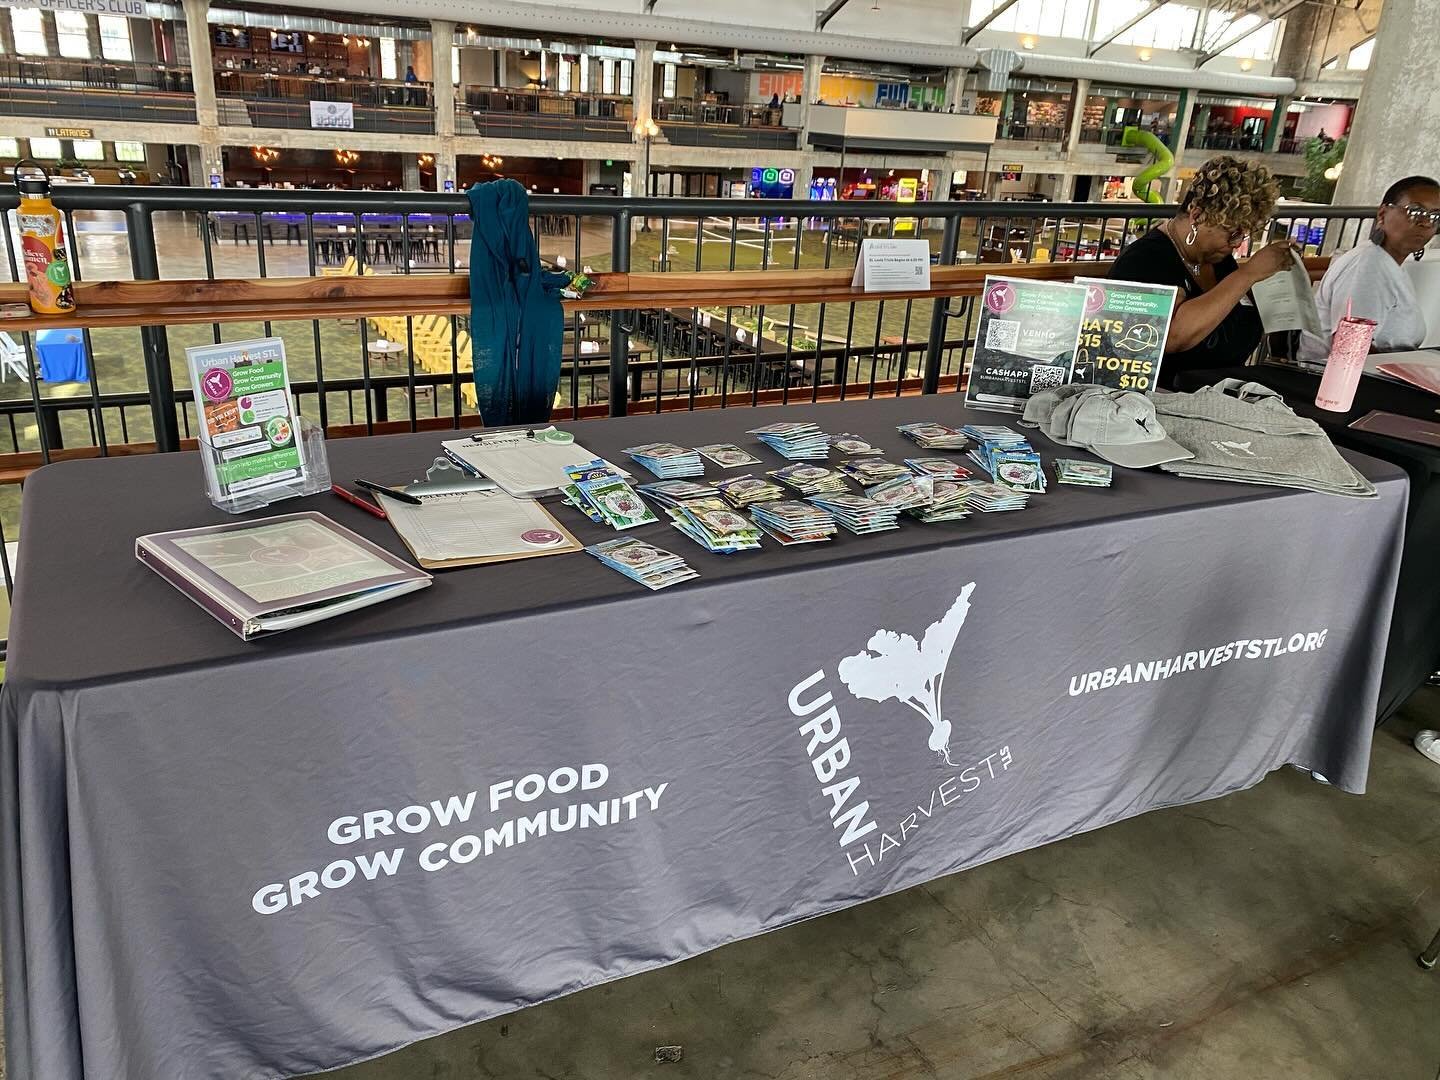 Come see us at Nonprofit Night at the @armory_stl!  We have seeds to give away and hats and totes to sell.  And learn how you can support Urban Harvest STL on #givestlday!